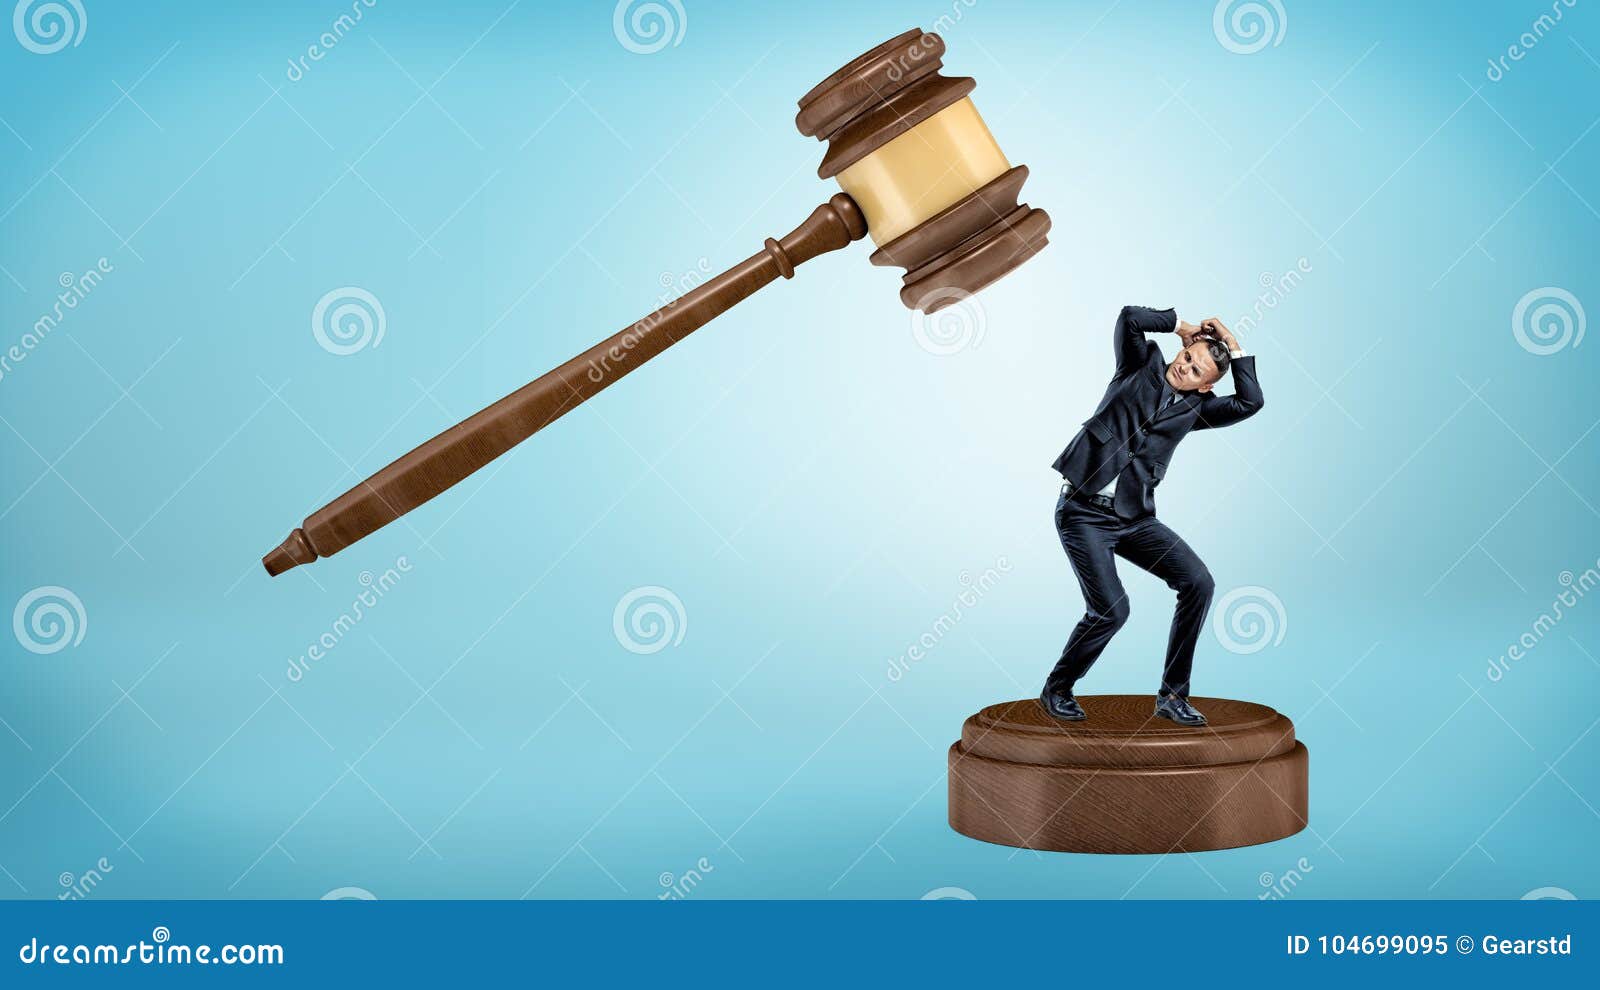 a small businessman tries to avoid a giant gavel strike while standing on a sound block.